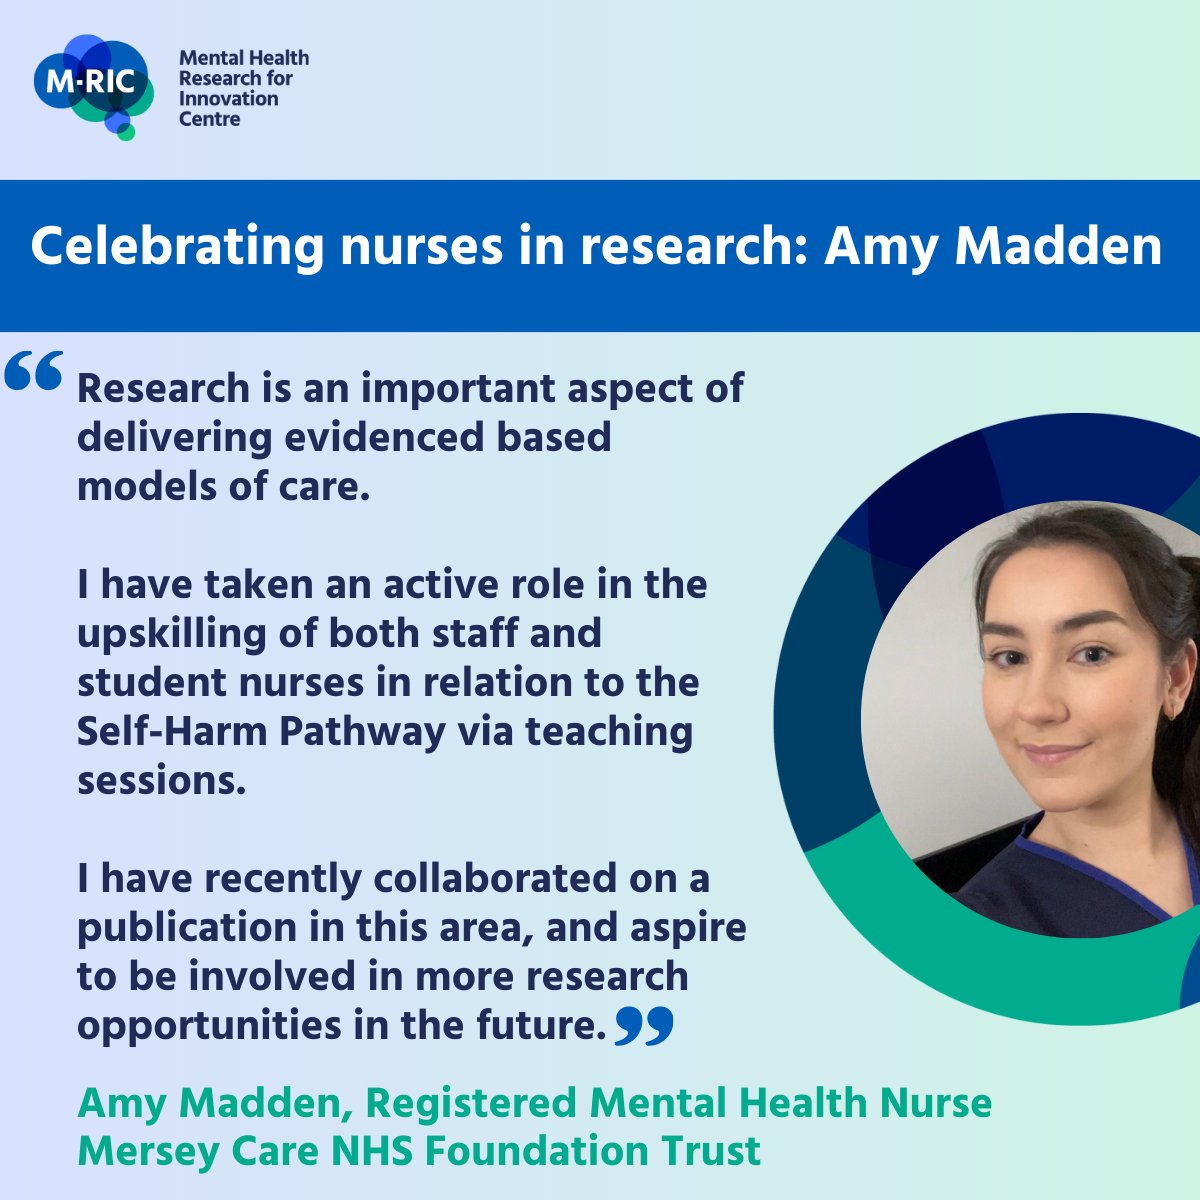 We end our week celebrating inspirational nurses in research by focusing on Amy Madden, a Registered Mental Health Nurse at @Mersey_Care. Amy is working hard to upskill staff and student nurses so they can better support patients who self-harm. Brilliant work Amy! #IND2024